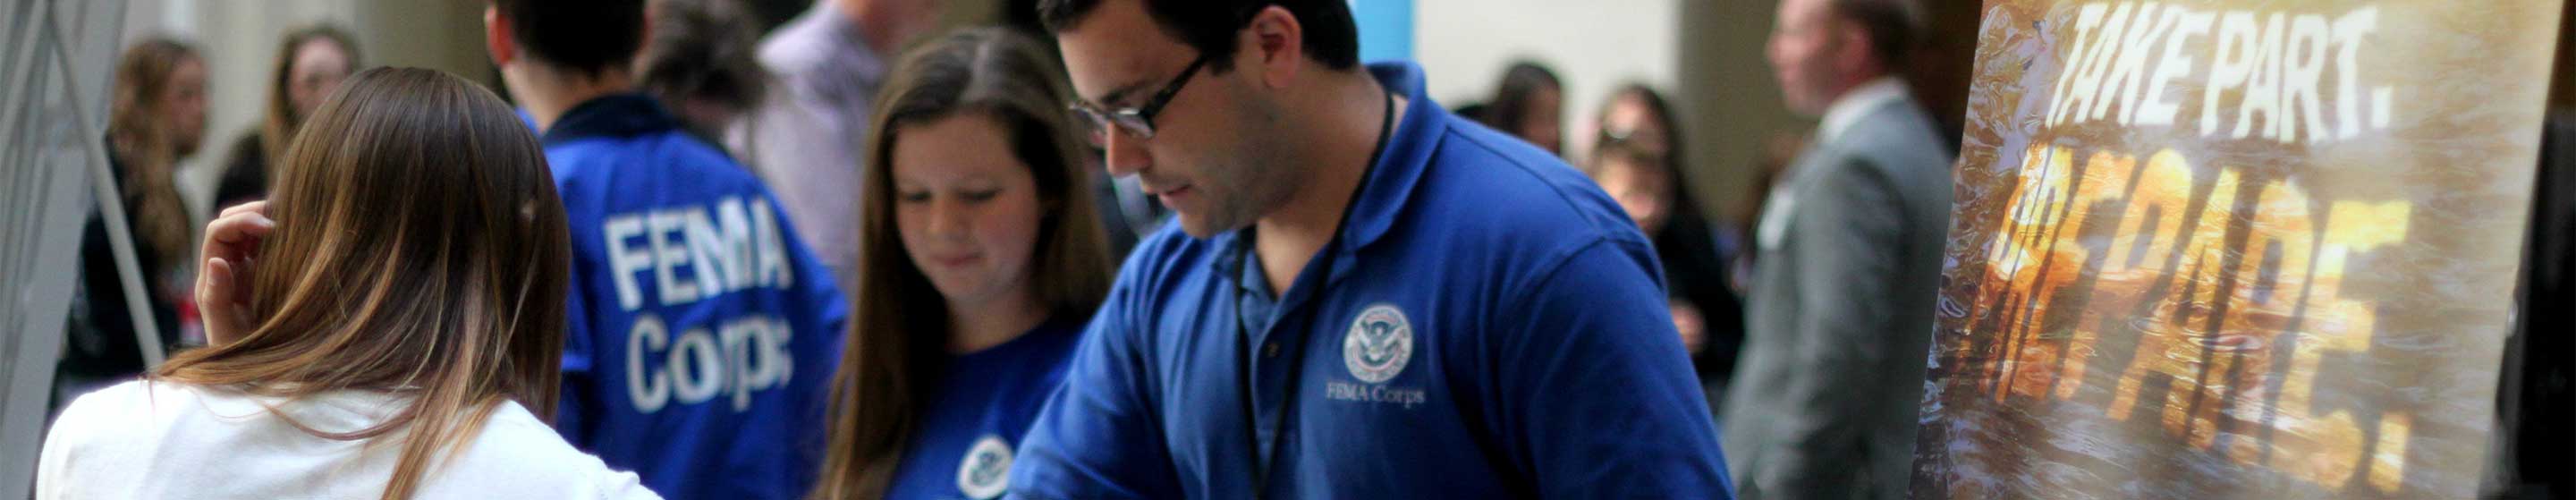 Picture of U.S. Department of Homeland Security FEMA employees in the field